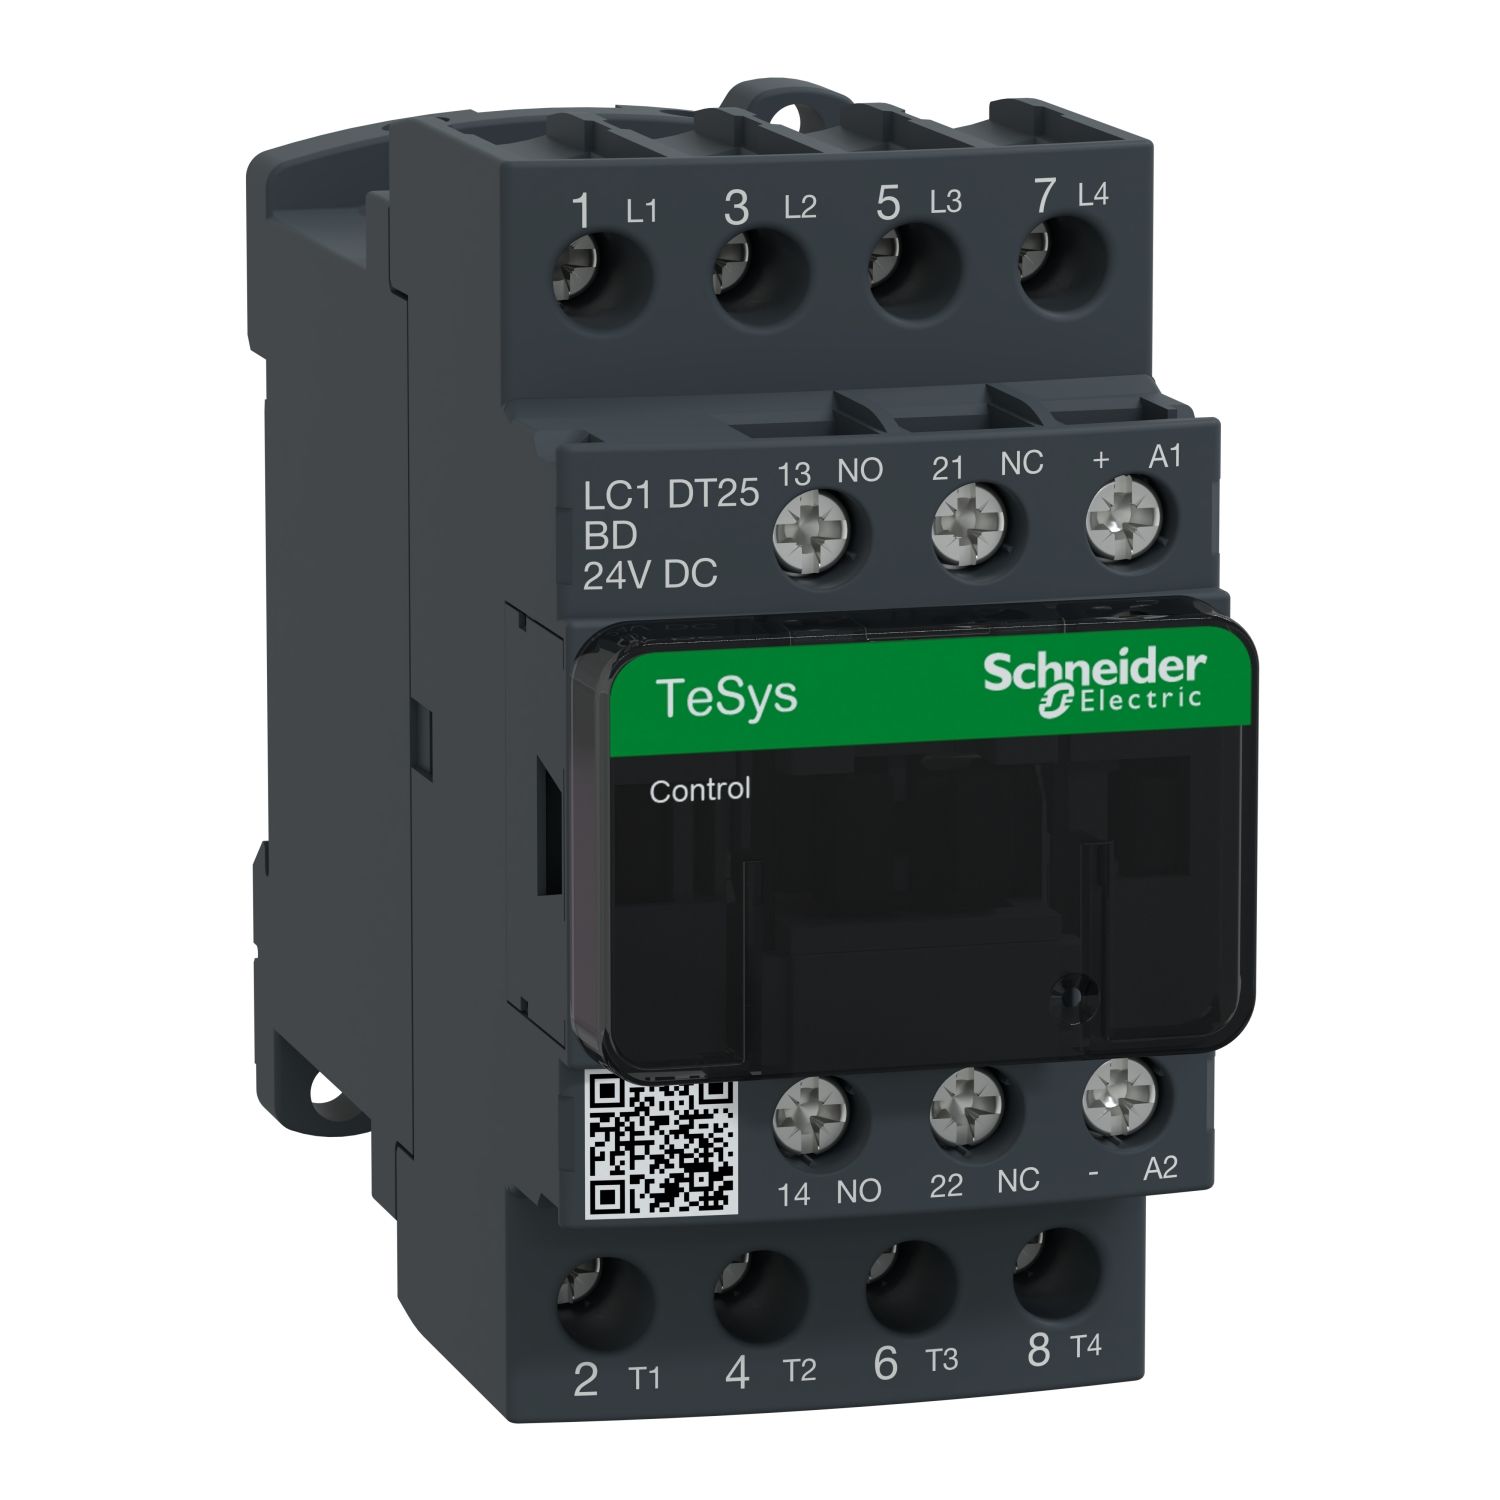 LC1DT25BD Contactor, TeSys Deca, 4P(4 NO), AC-1, <=440V, 25A, 24VDC standard coil, screw clamp terminal